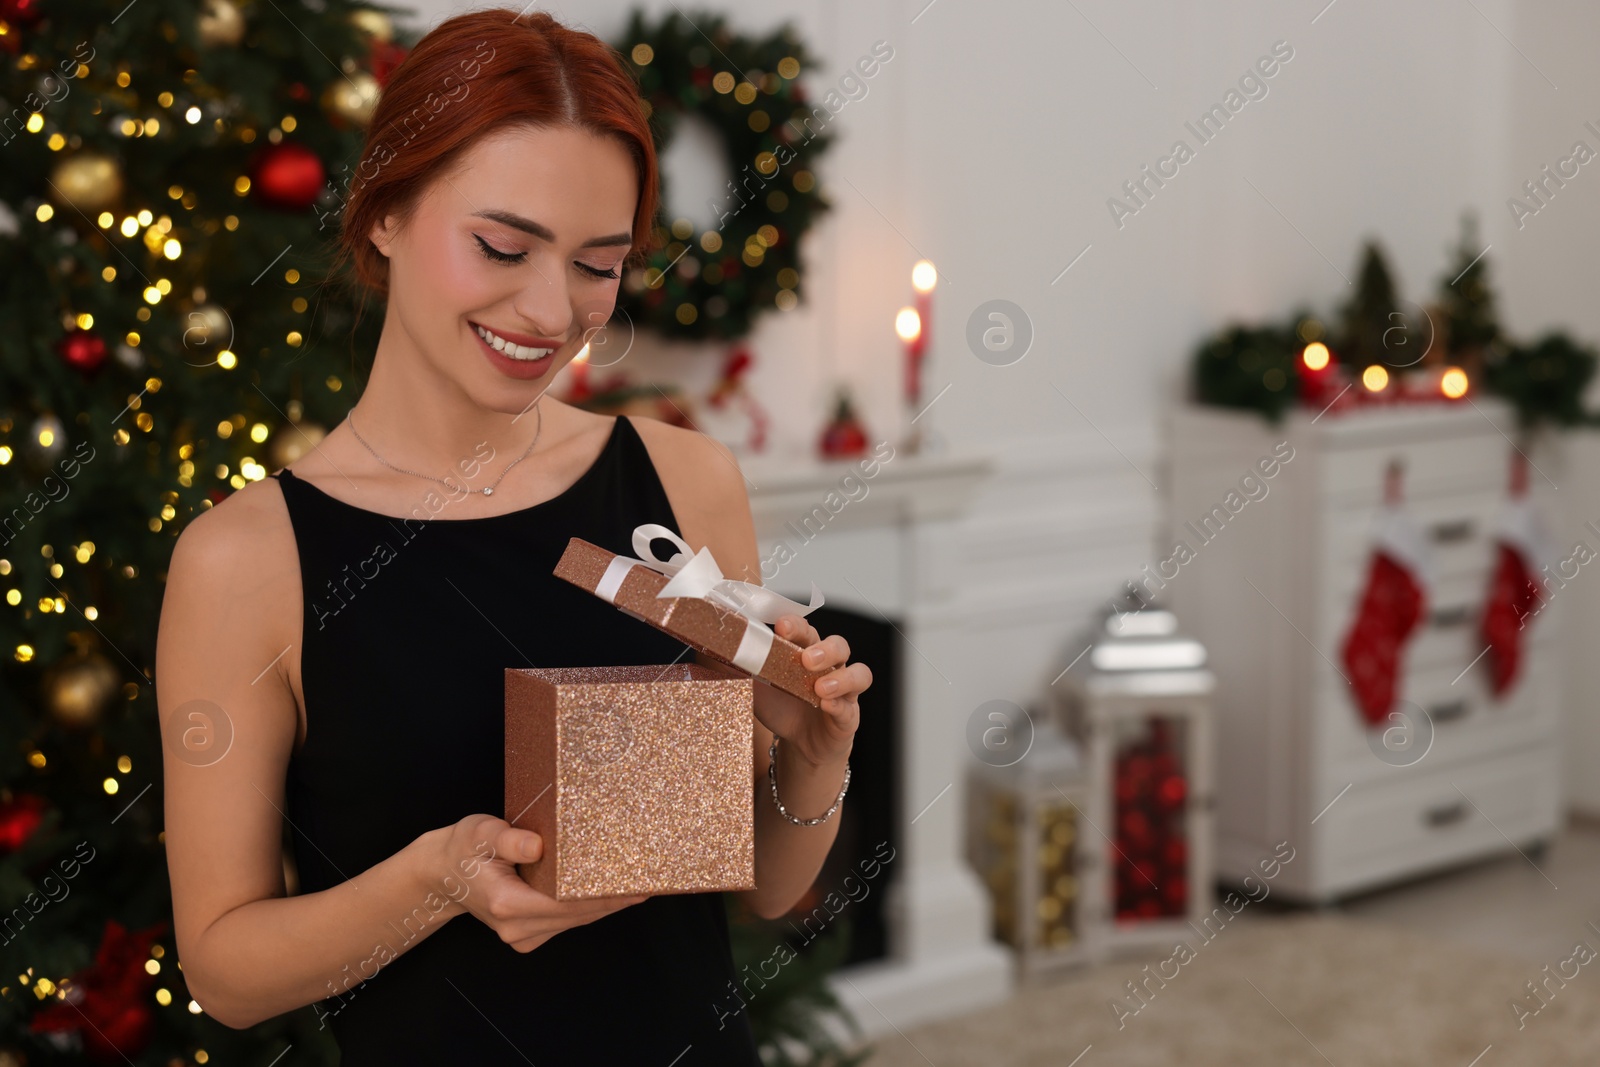 Photo of Happy young woman opening gift box in room decorated for Christmas, space for text